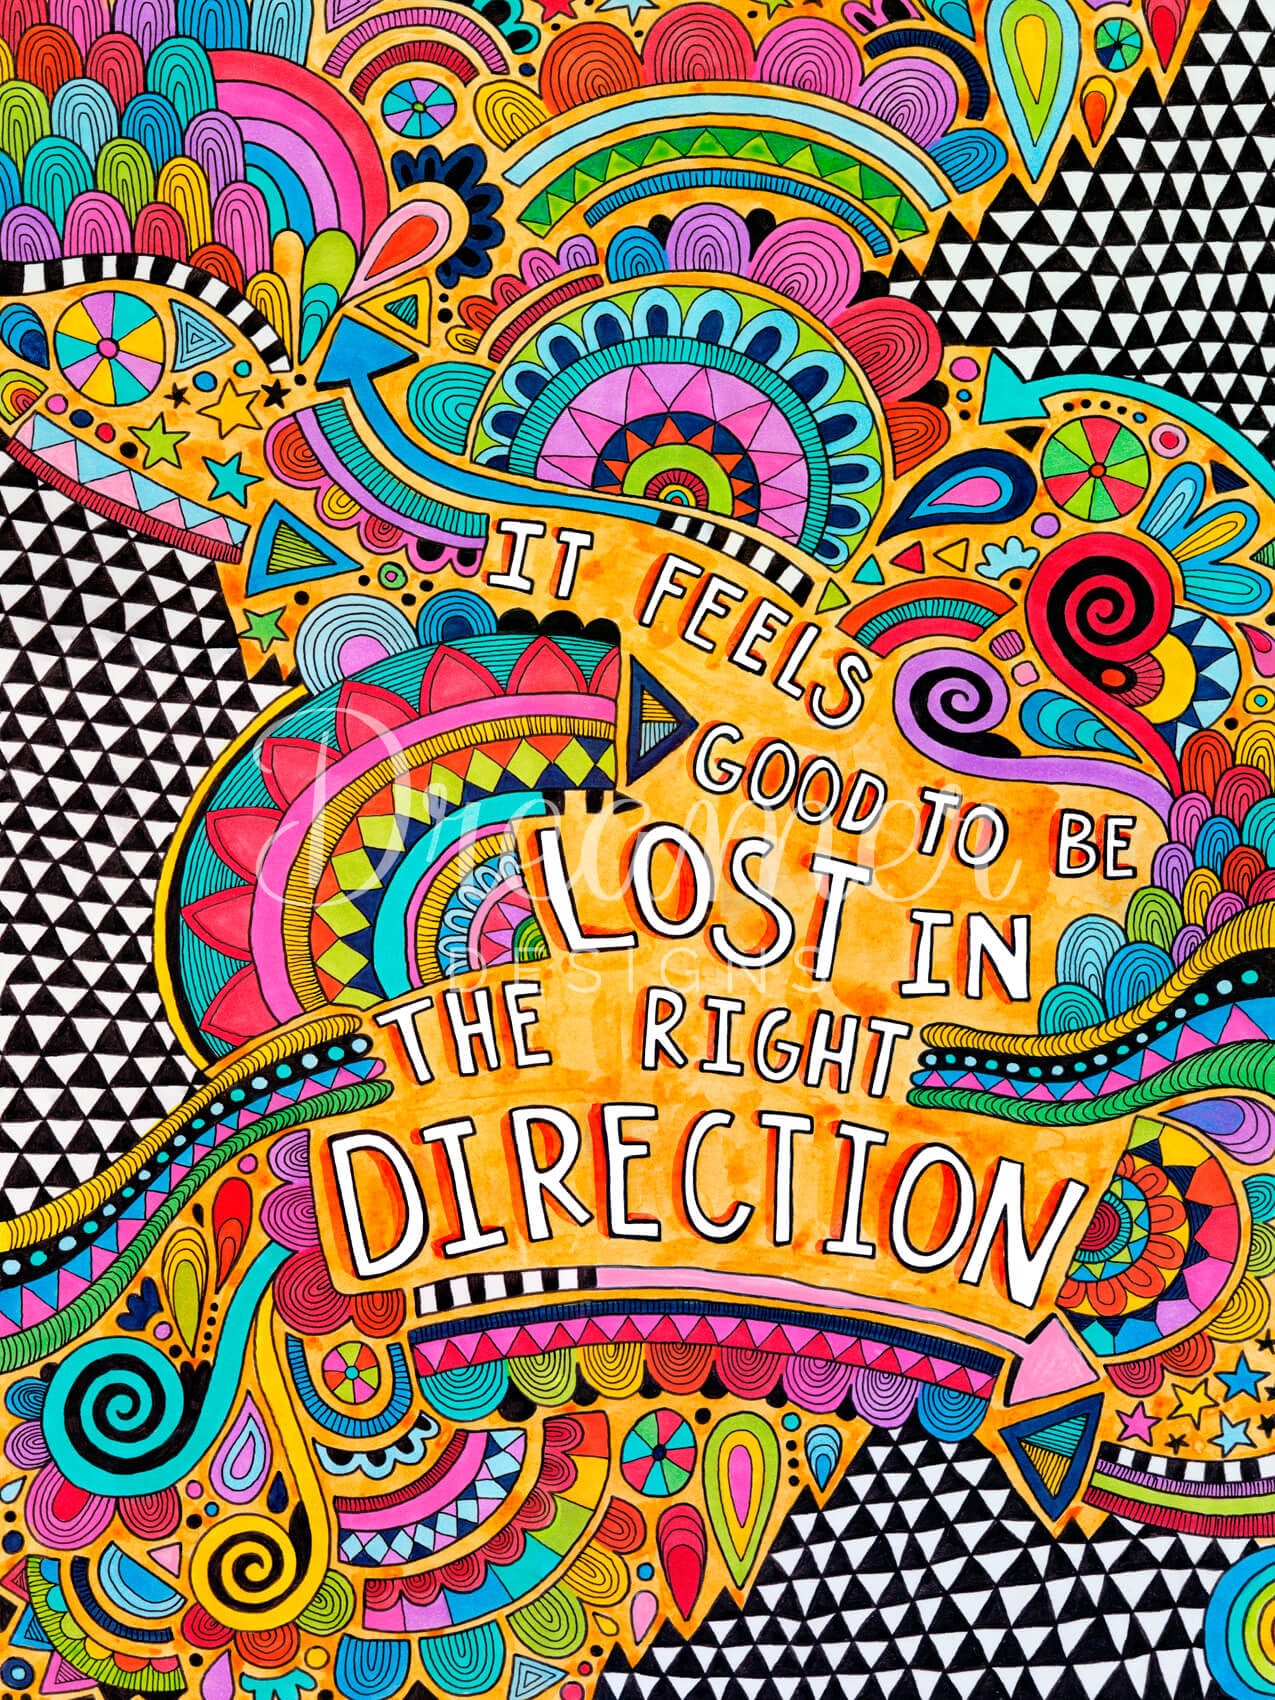 Lost in the Right Direction